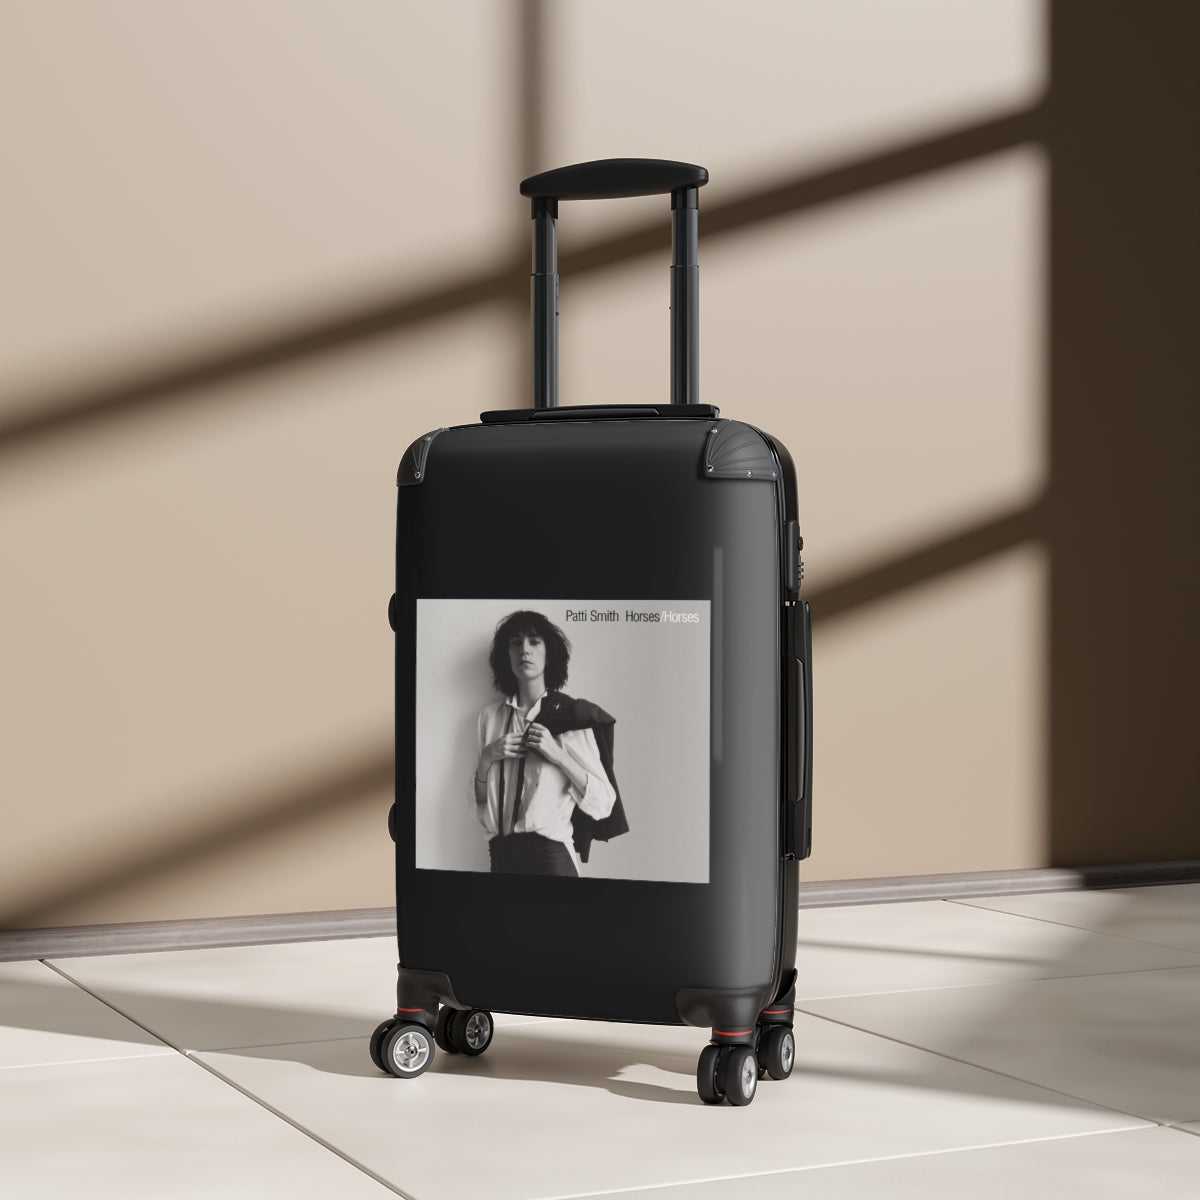 Getrott Patti Smith Horses 1975 Black Cabin Suitcase Inner Pockets Extended Storage Adjustable Telescopic Handle Inner Pockets Double wheeled Polycarbonate Hard-shell Built-in Lock